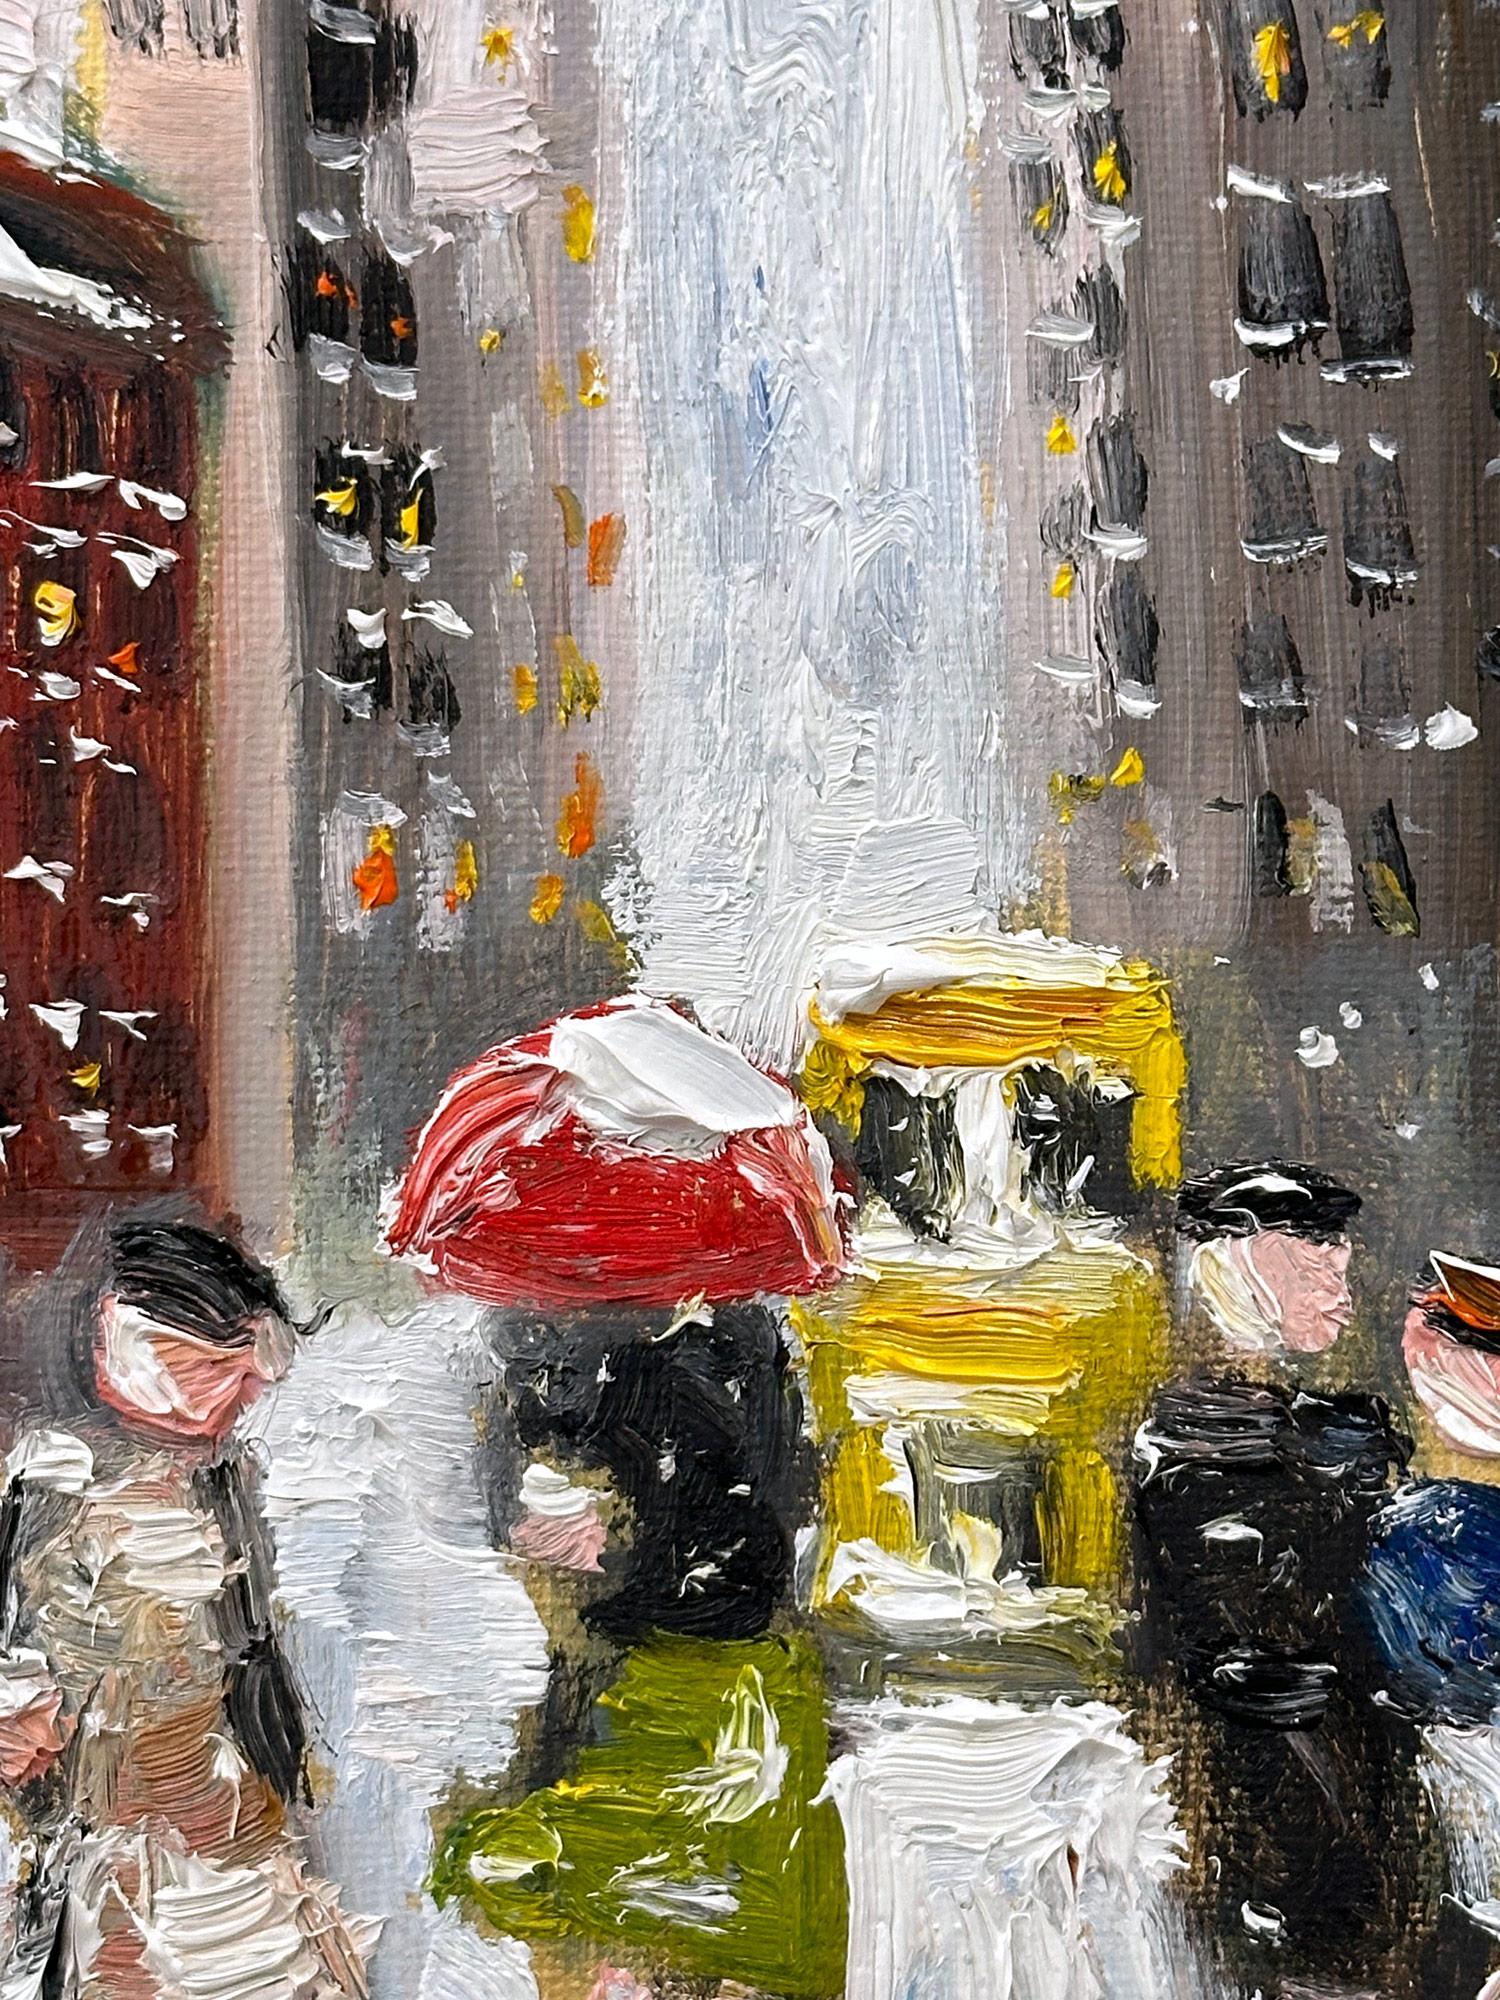 A charming depiction of Snow in New York City on Fifth Avenue with figures walking a dog. A cozy impressionistic street scene with colors of cobalts, light pink, whites, and burnt sienna's. An iconic street scene with beautiful brushwork and